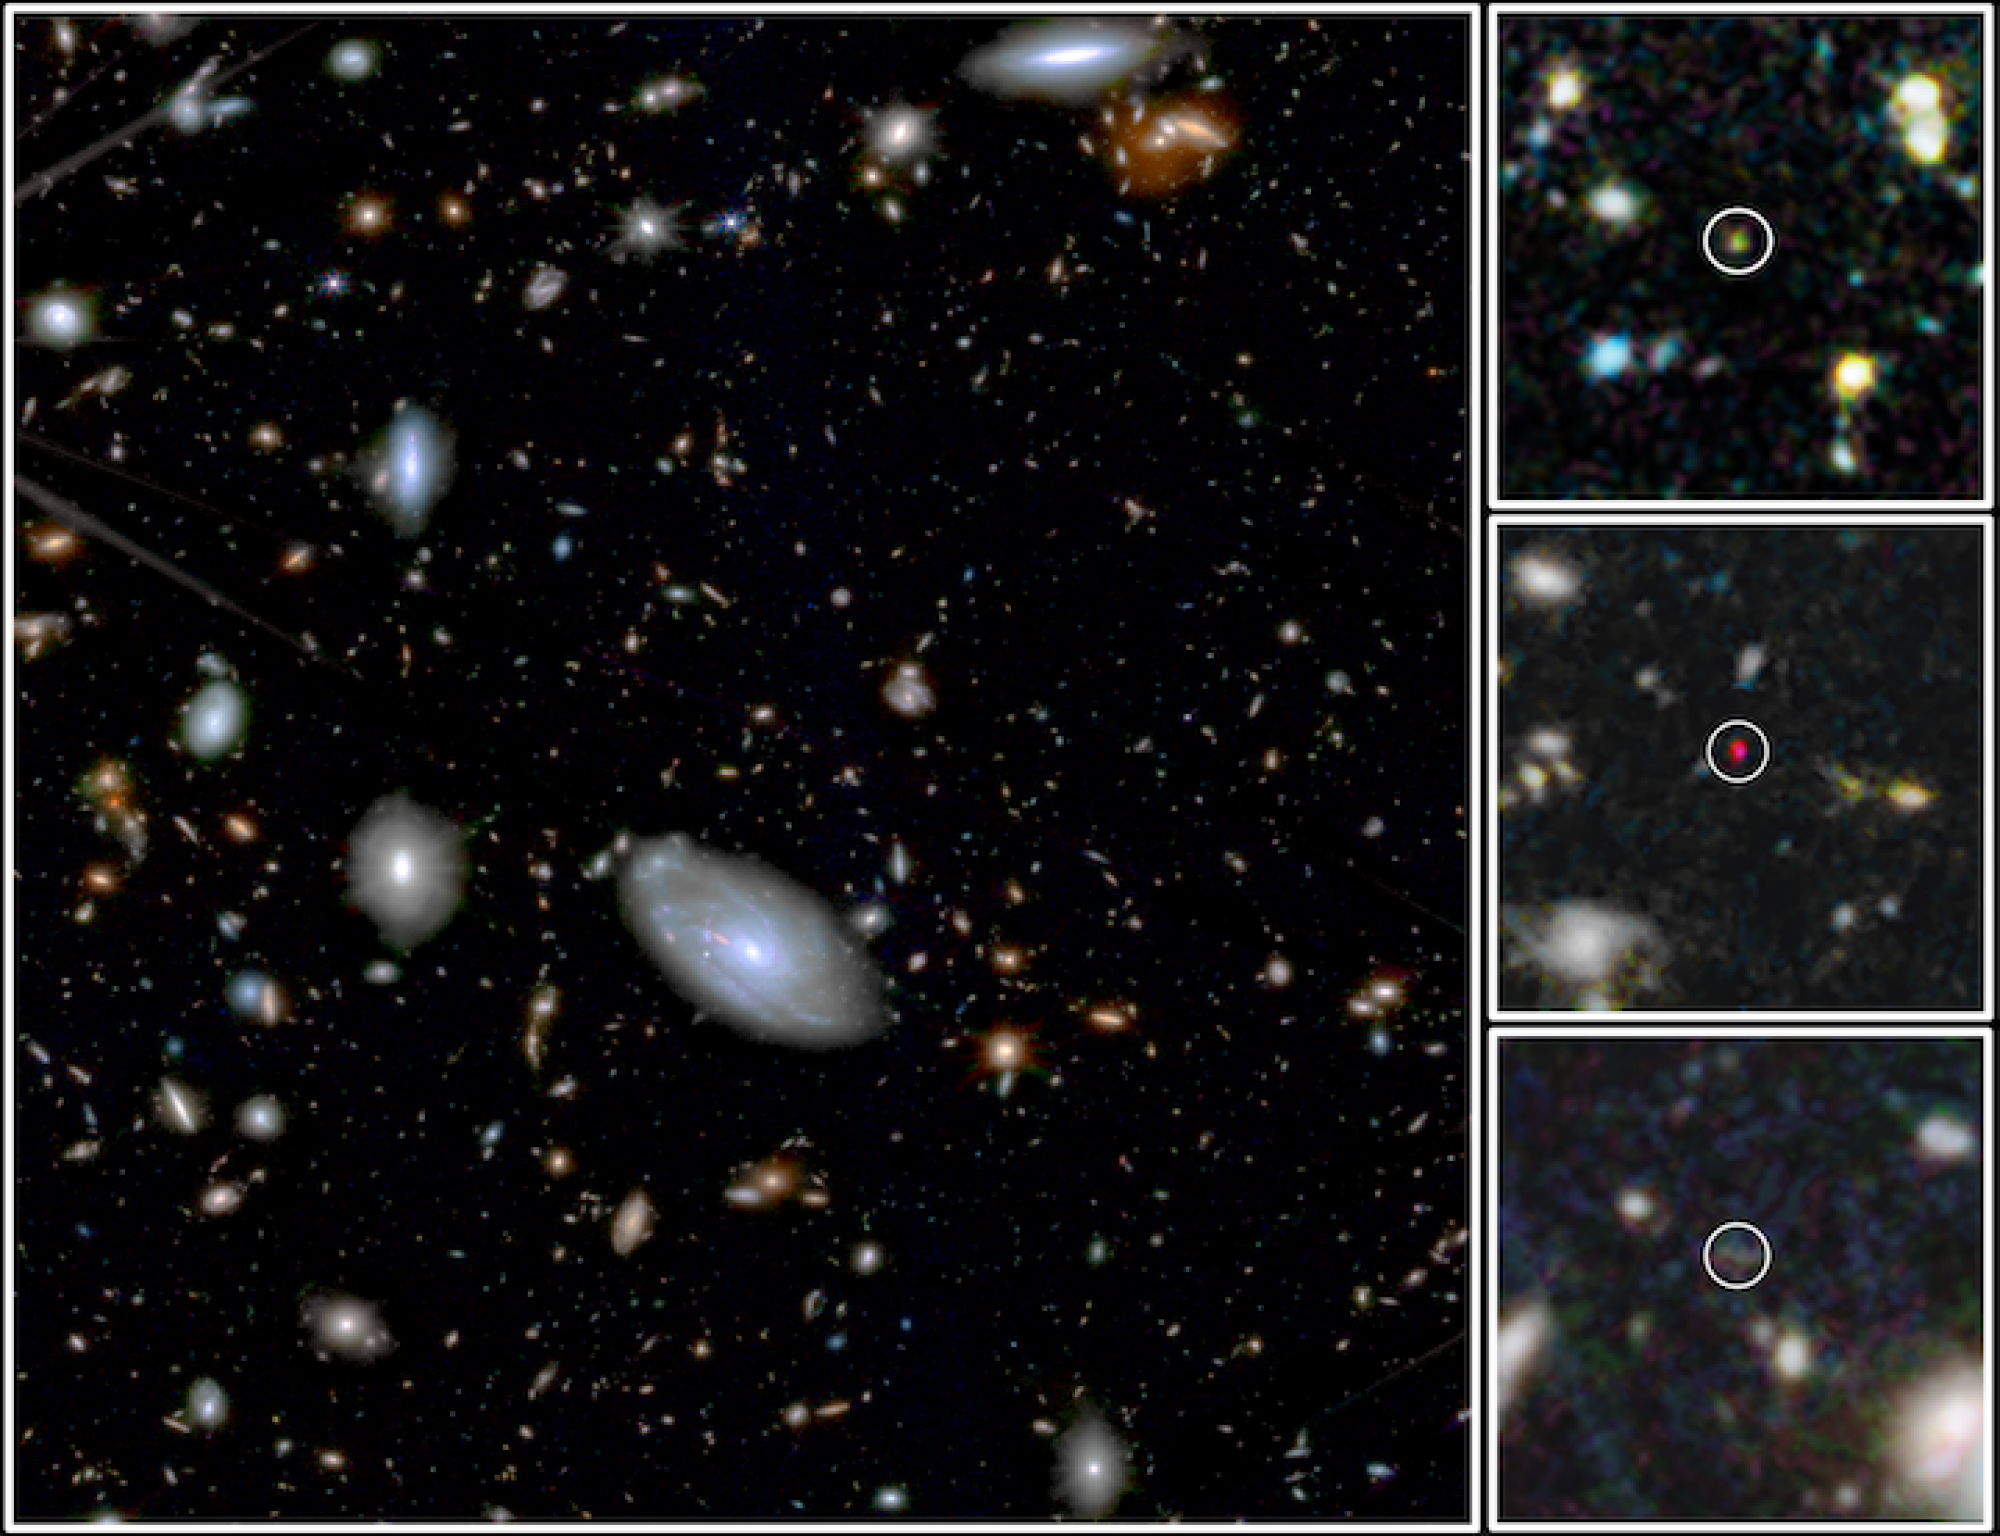 Ancient galaxies imaged by the James Webb Space Telescope's MIRI Deep Imaging Survey.